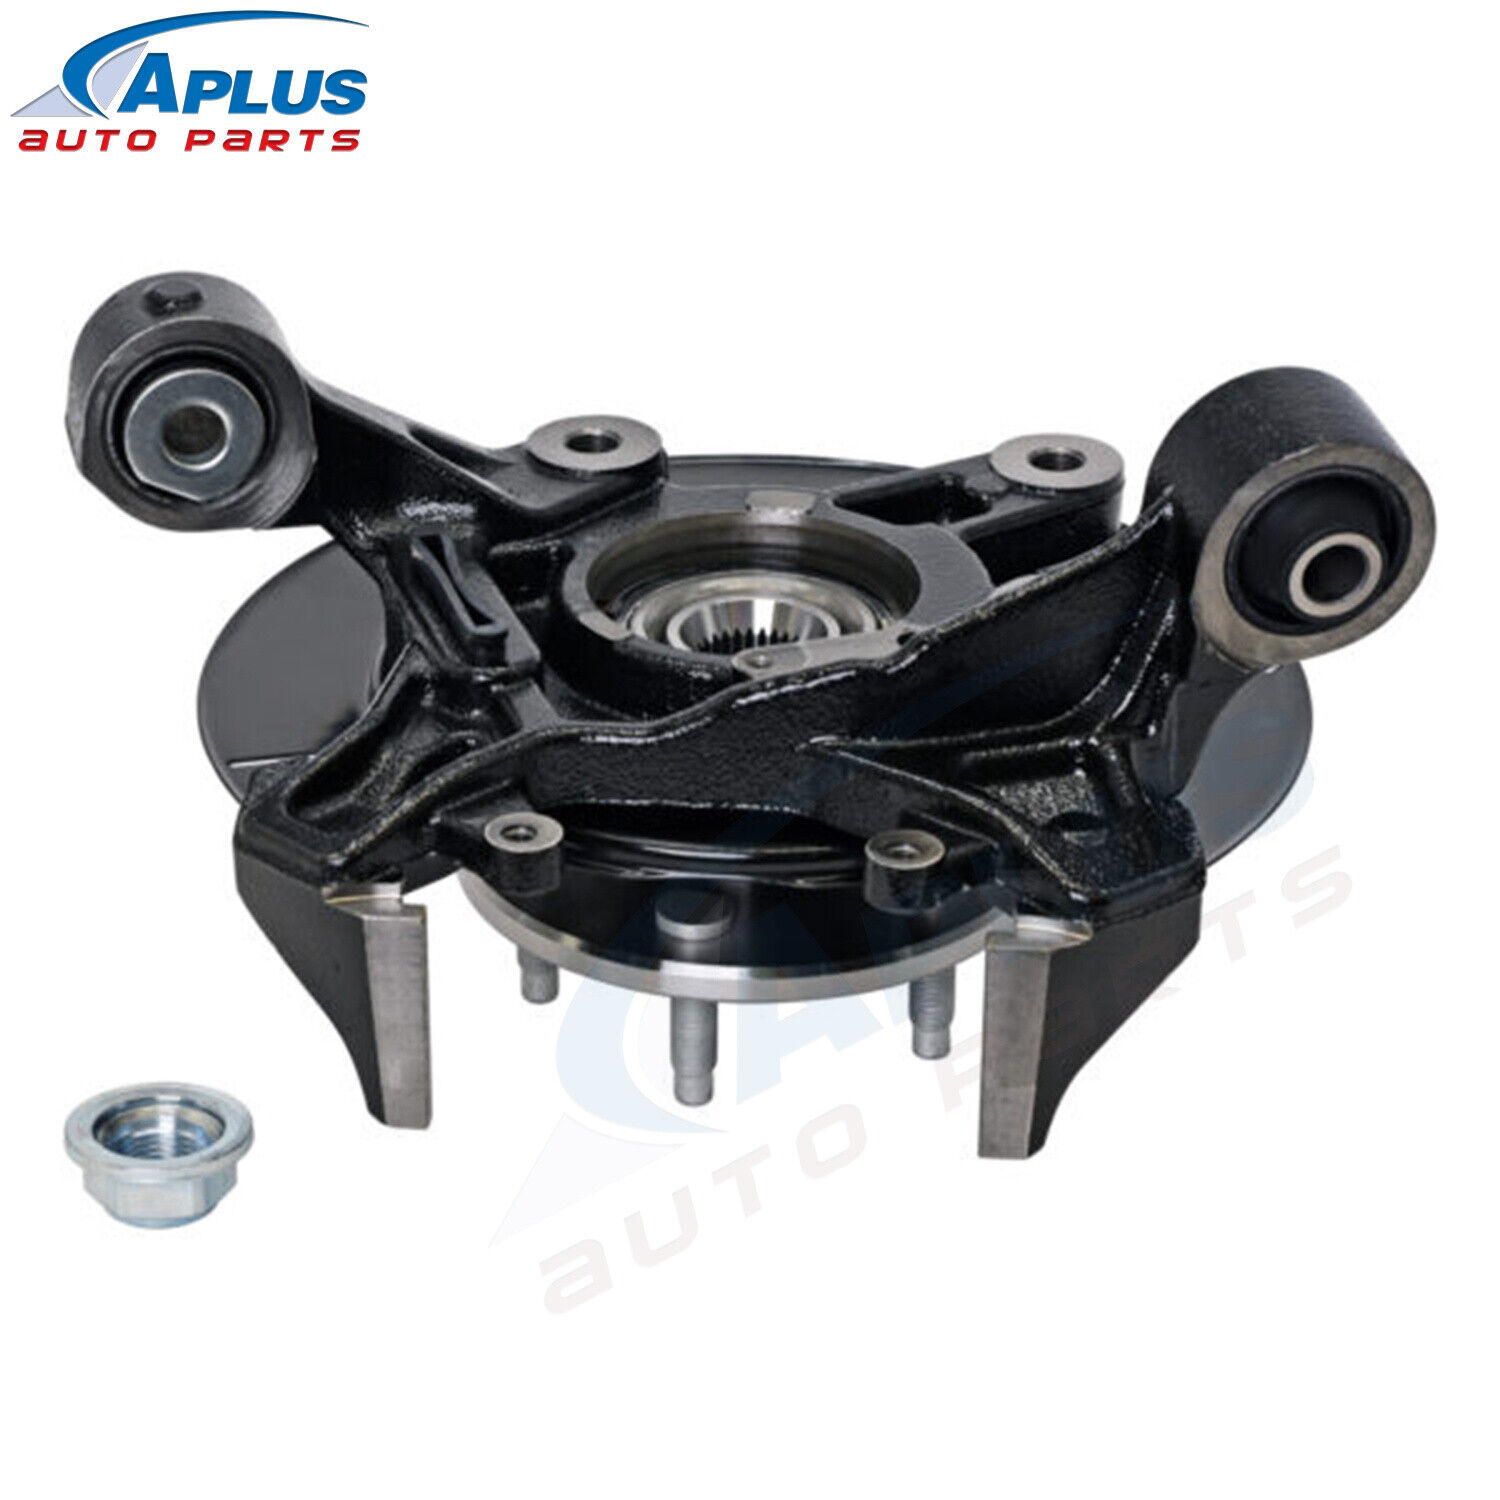 Rear LH Wheel Hub Bearing Steering Knuckle Assembly For 2006-2010 Ford Explorer